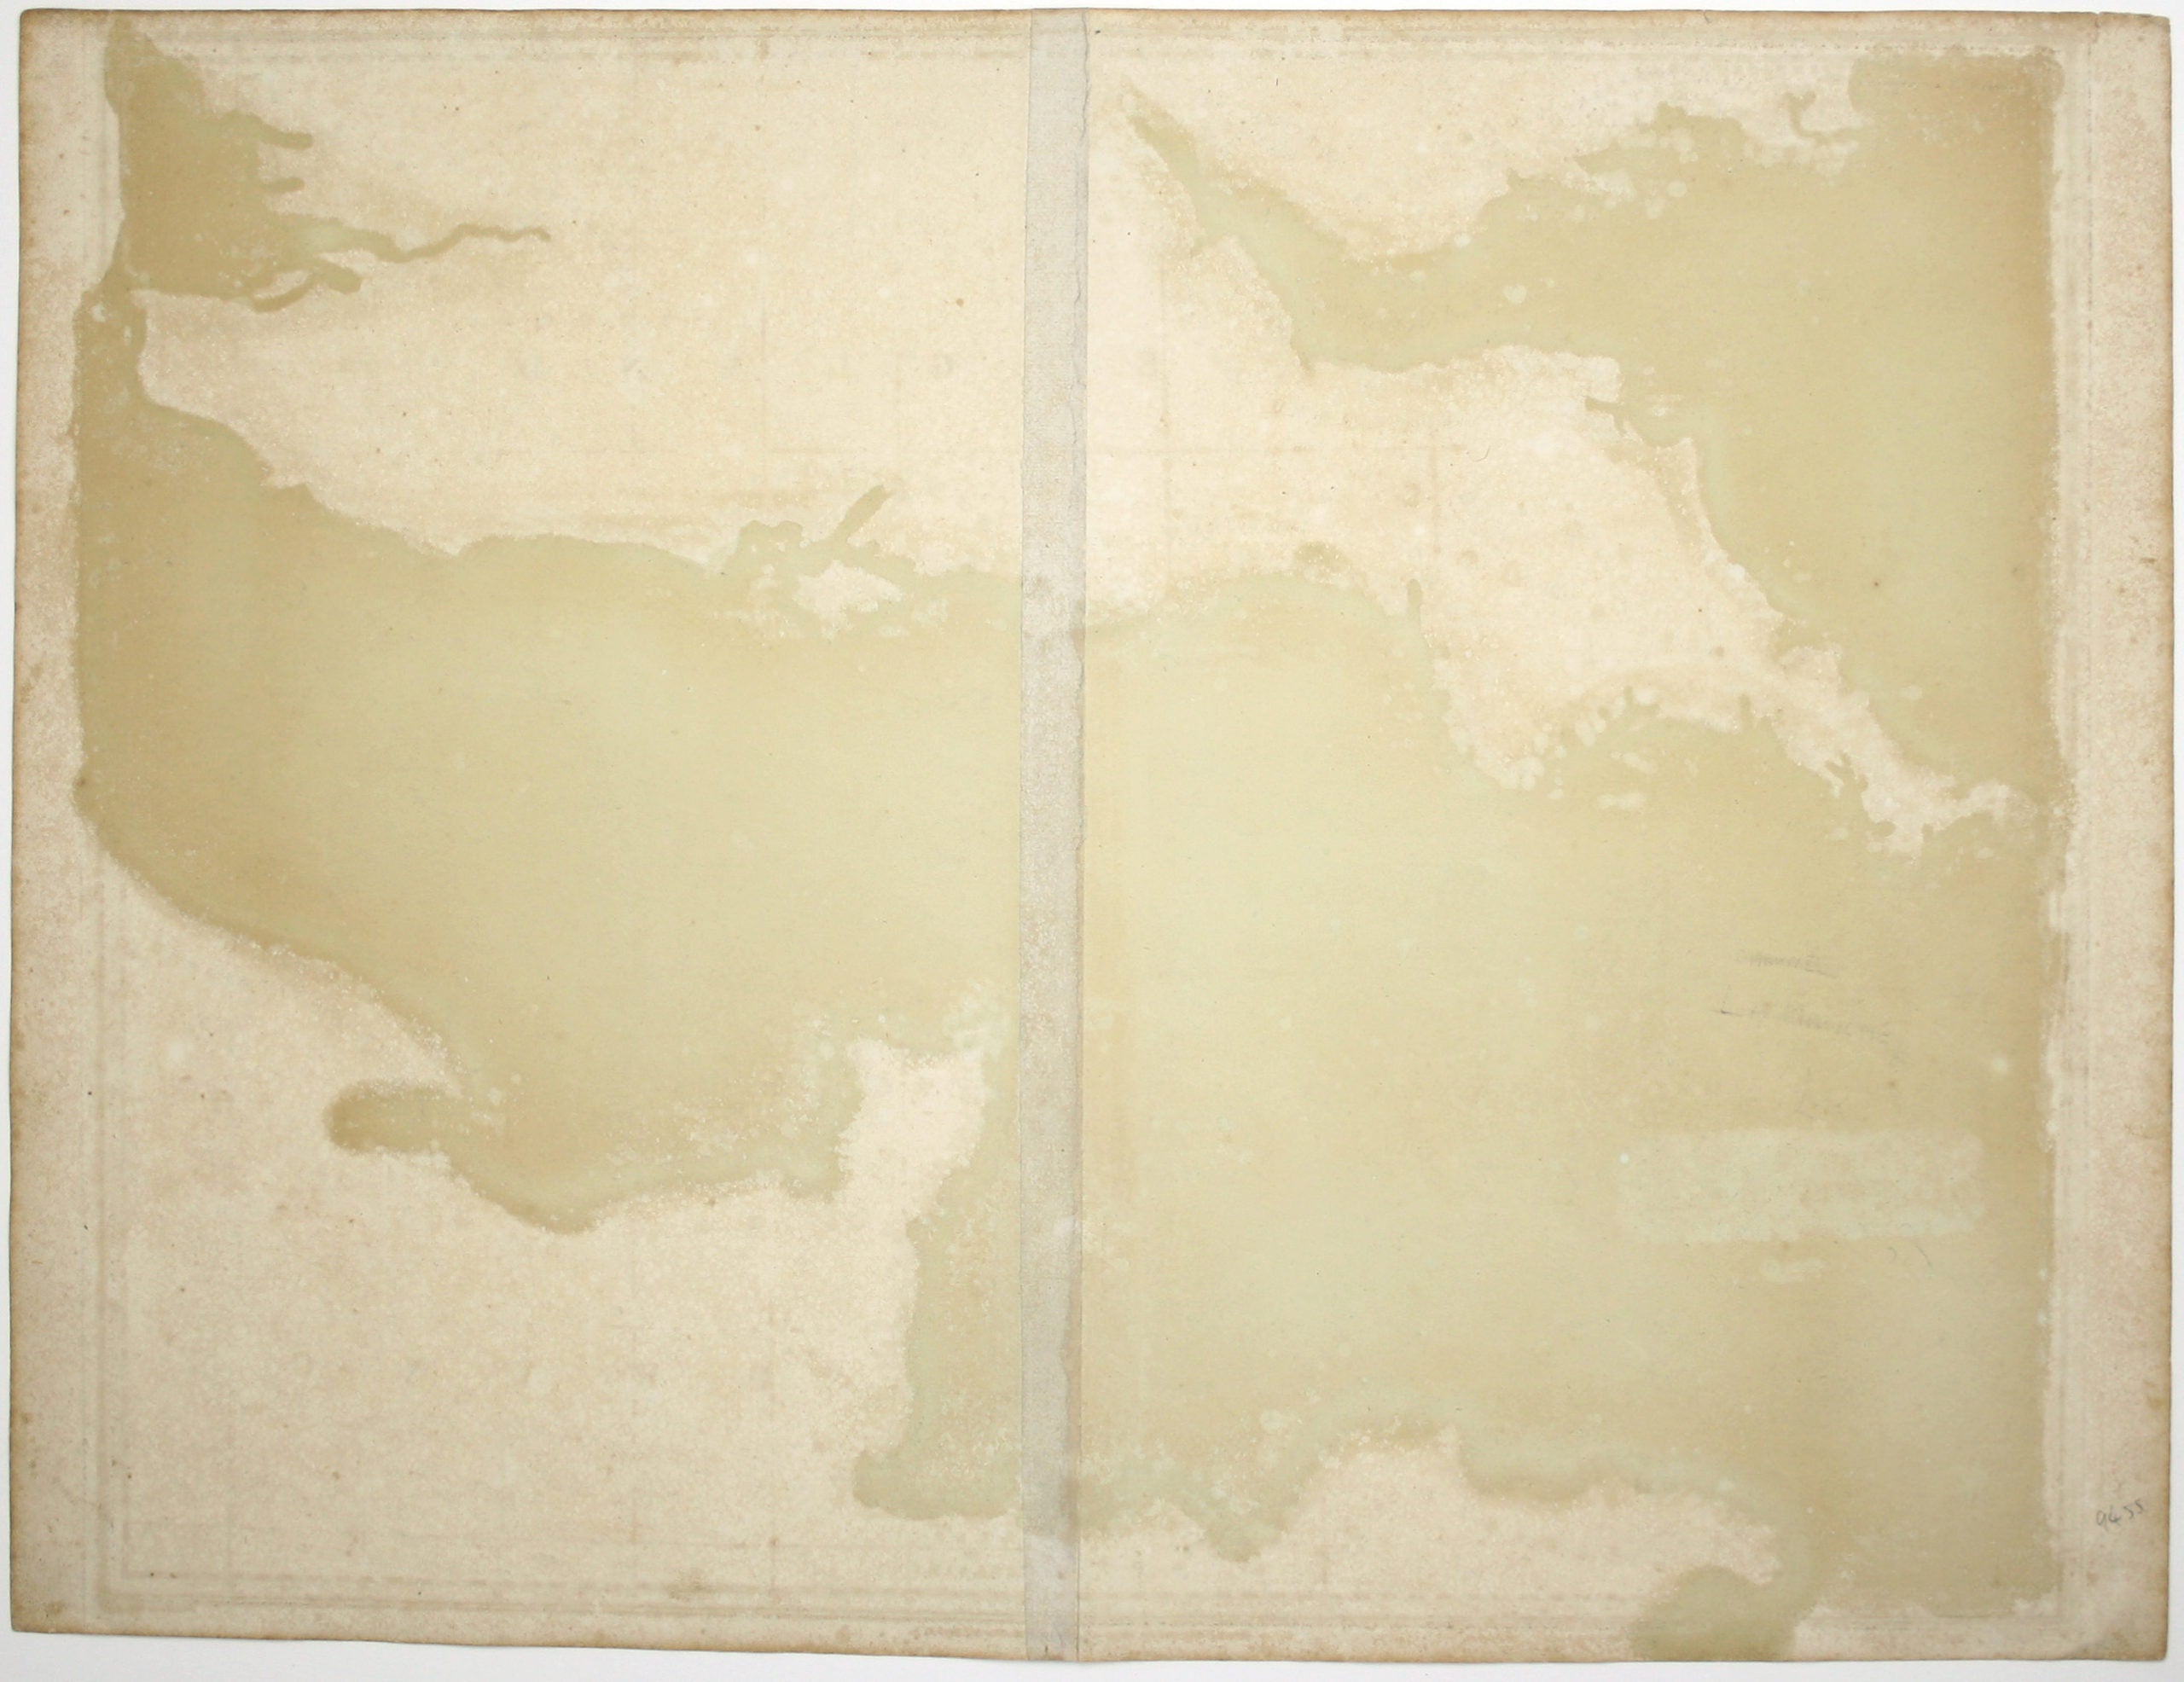 Thomson’s Map of the English Channel